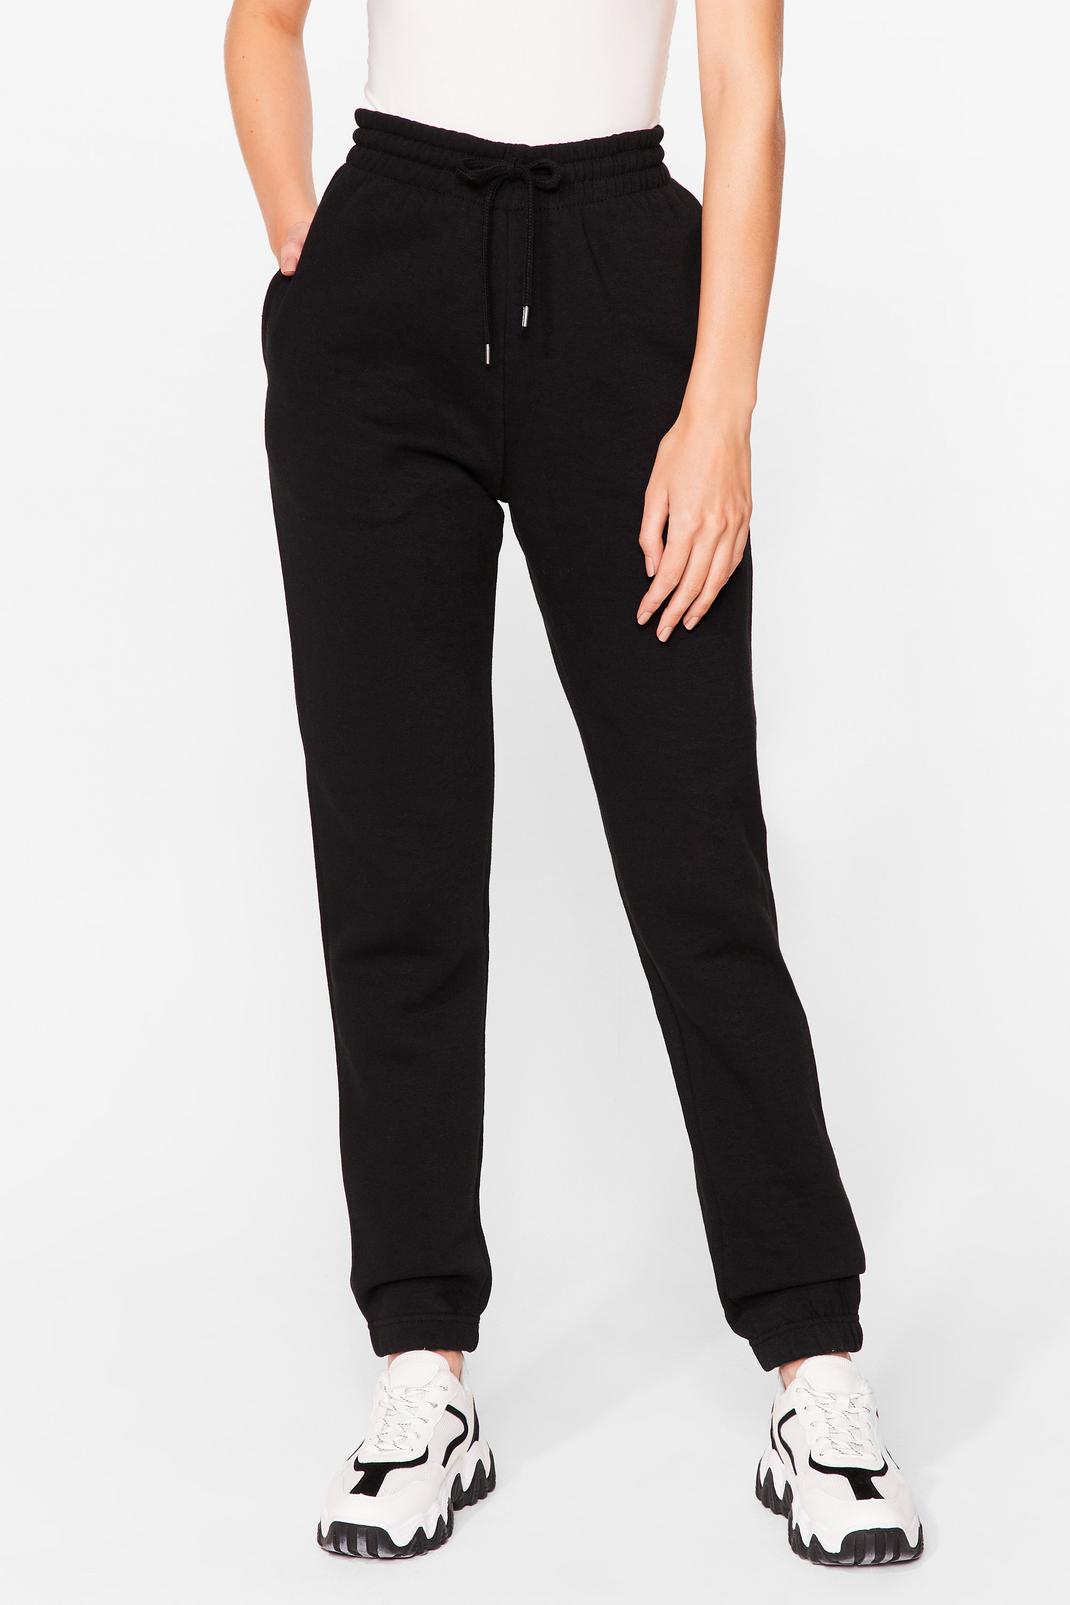 Black Run Through It High-Waisted Joggers image number 1